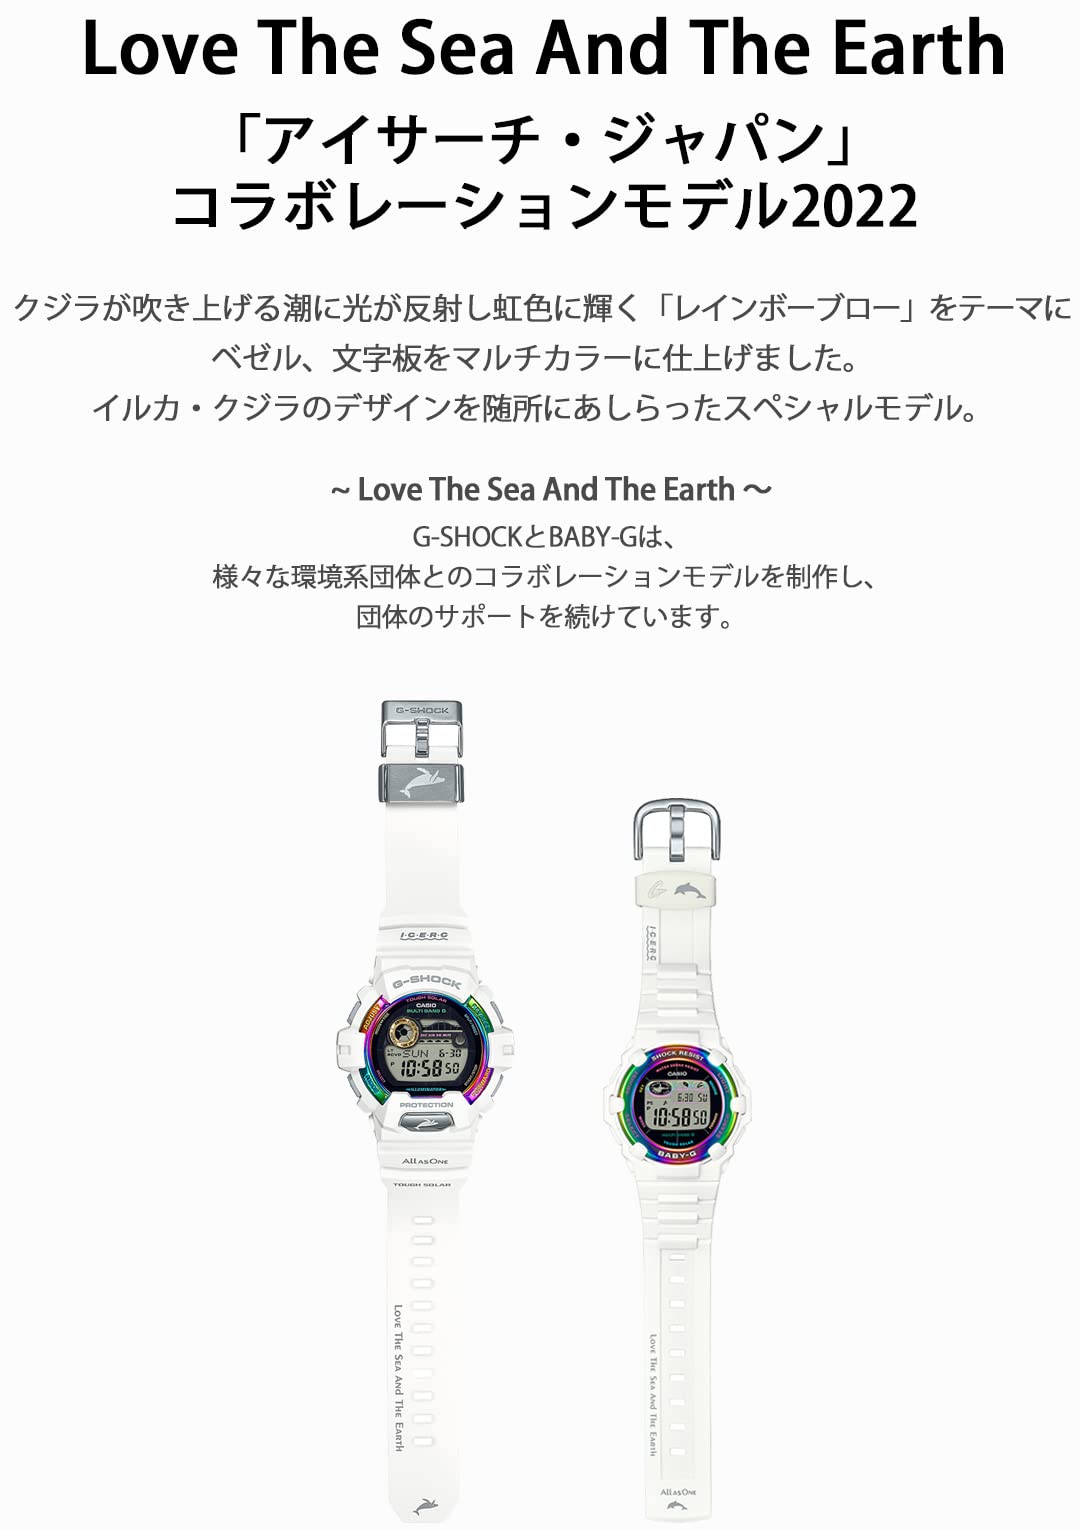 Casio BGR-3000UK-7JR [Baby-G Love The Sea and The Earth Dolphin/Whale Model] Watch Shipped from Japan Released in June 2022